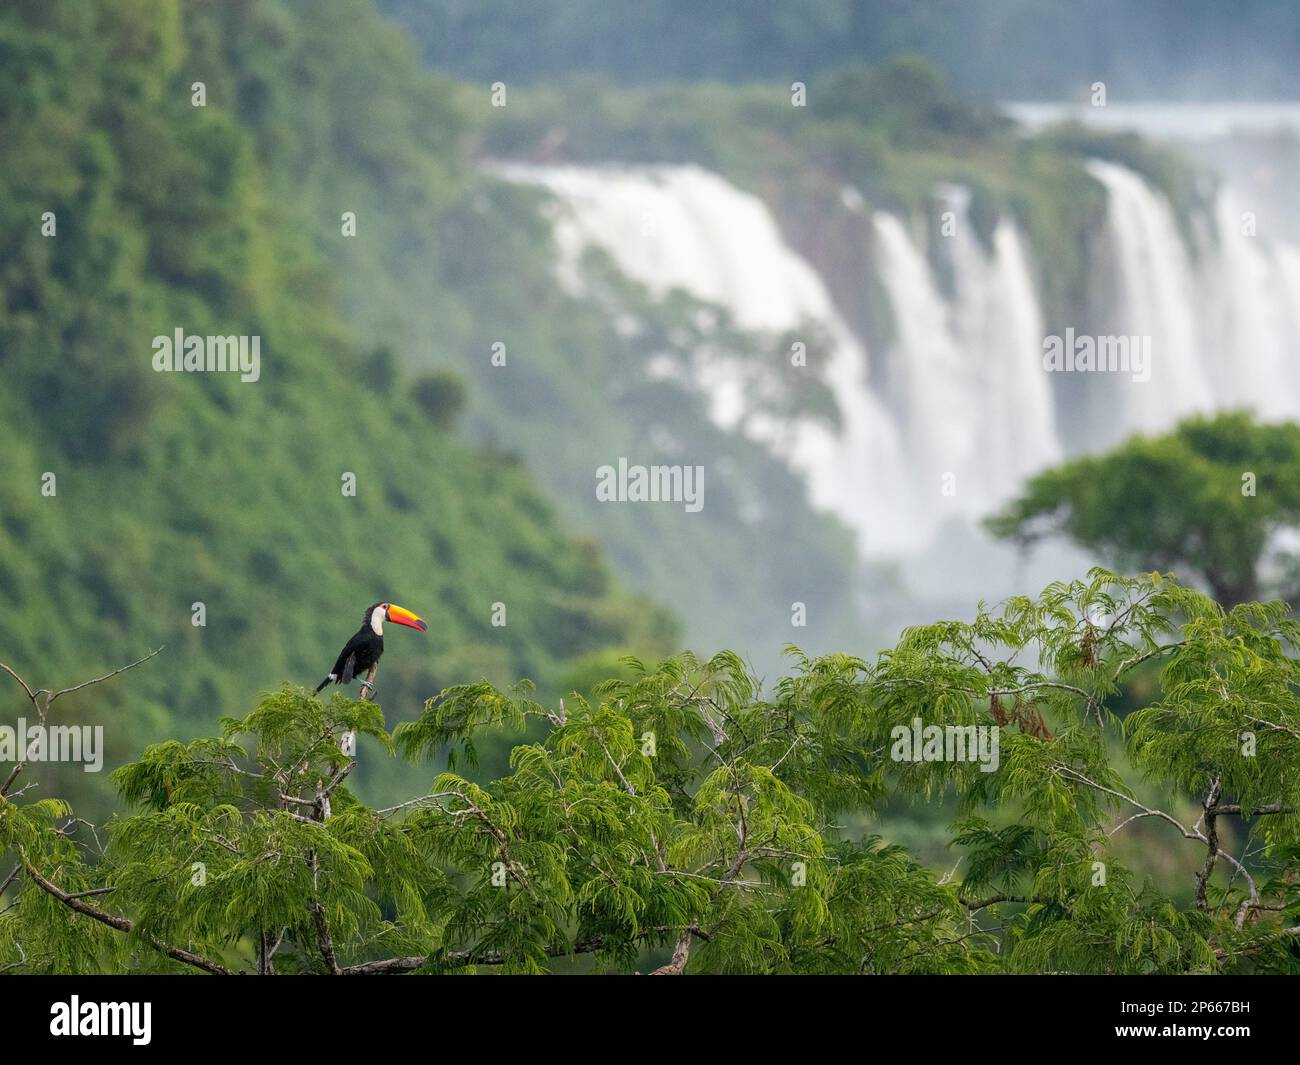 An adult toco toucan (Ramphastos toco), perched on a tree limb, Iguazu Falls, UNESCO, Misiones Province, Argentina, South America Stock Photo